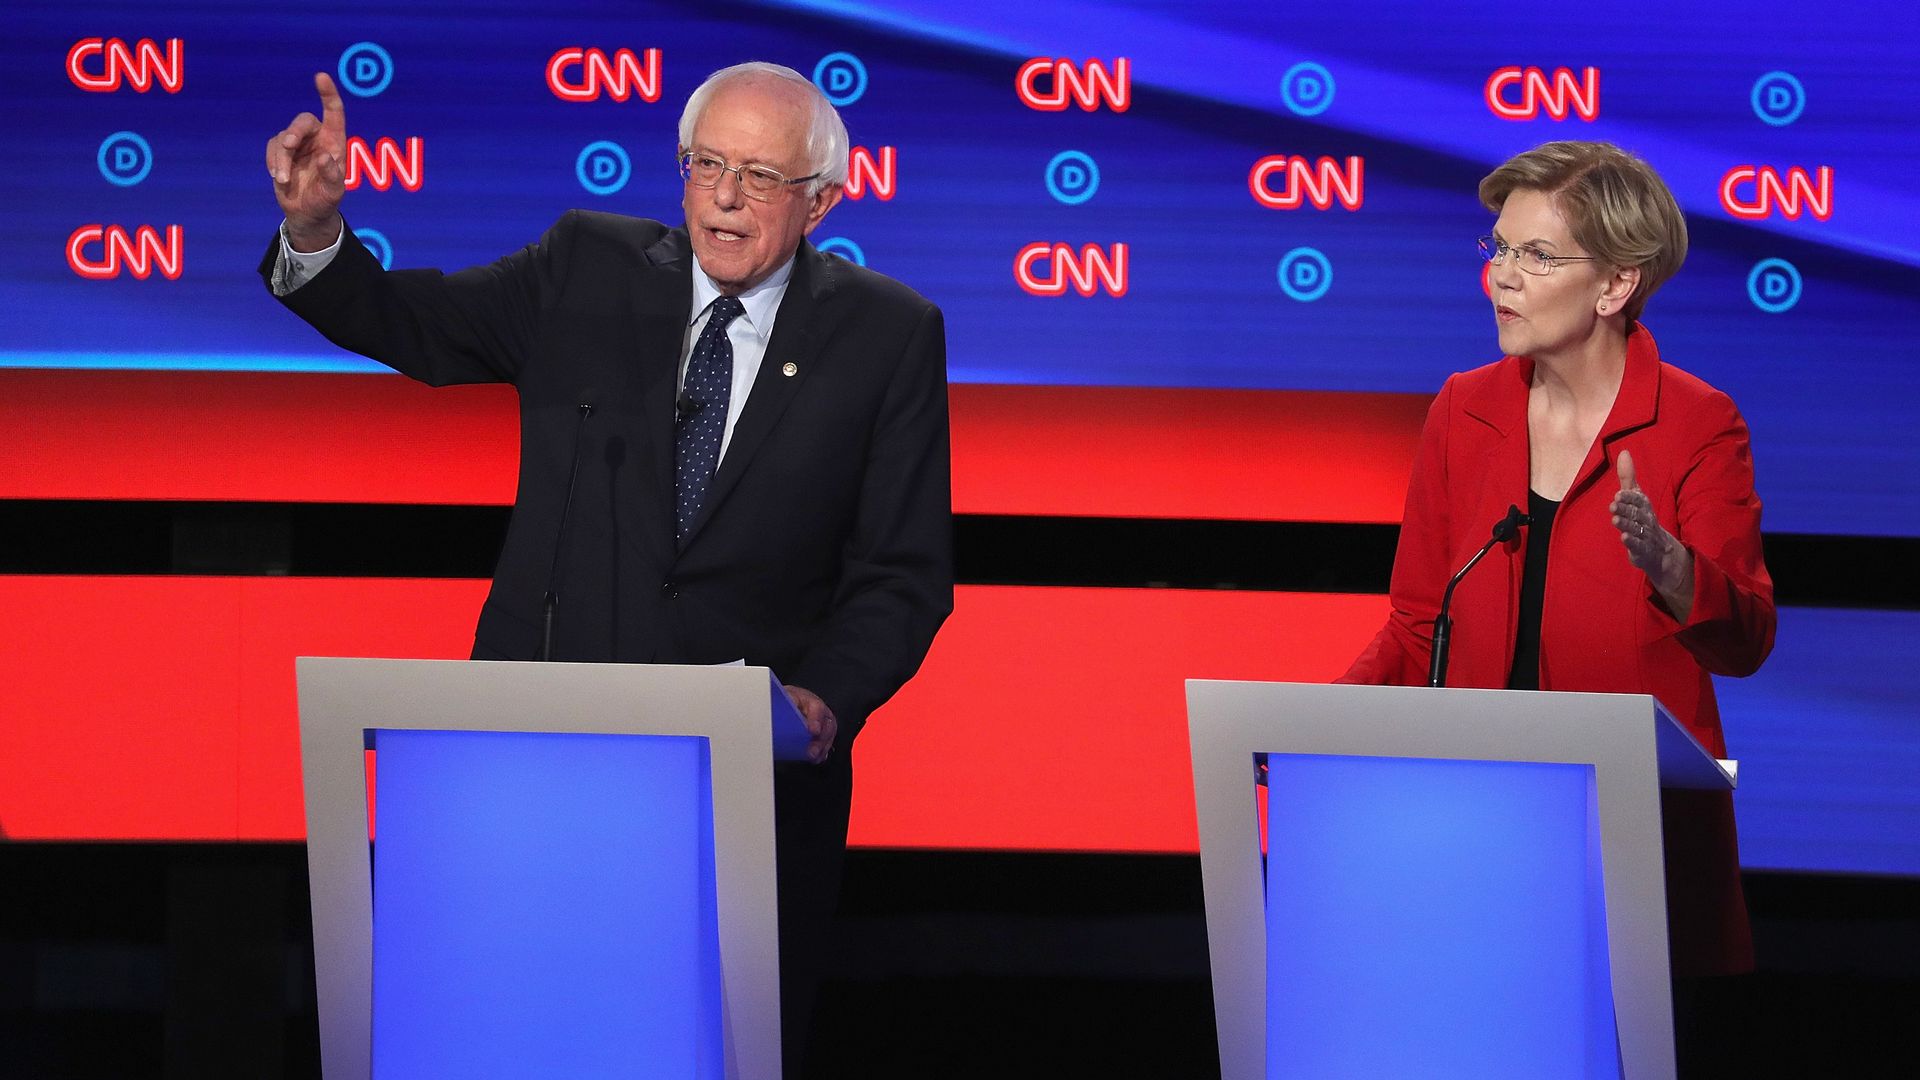 In this image, Warren and Sanders stand next to each other at two podiums on the debate stage.